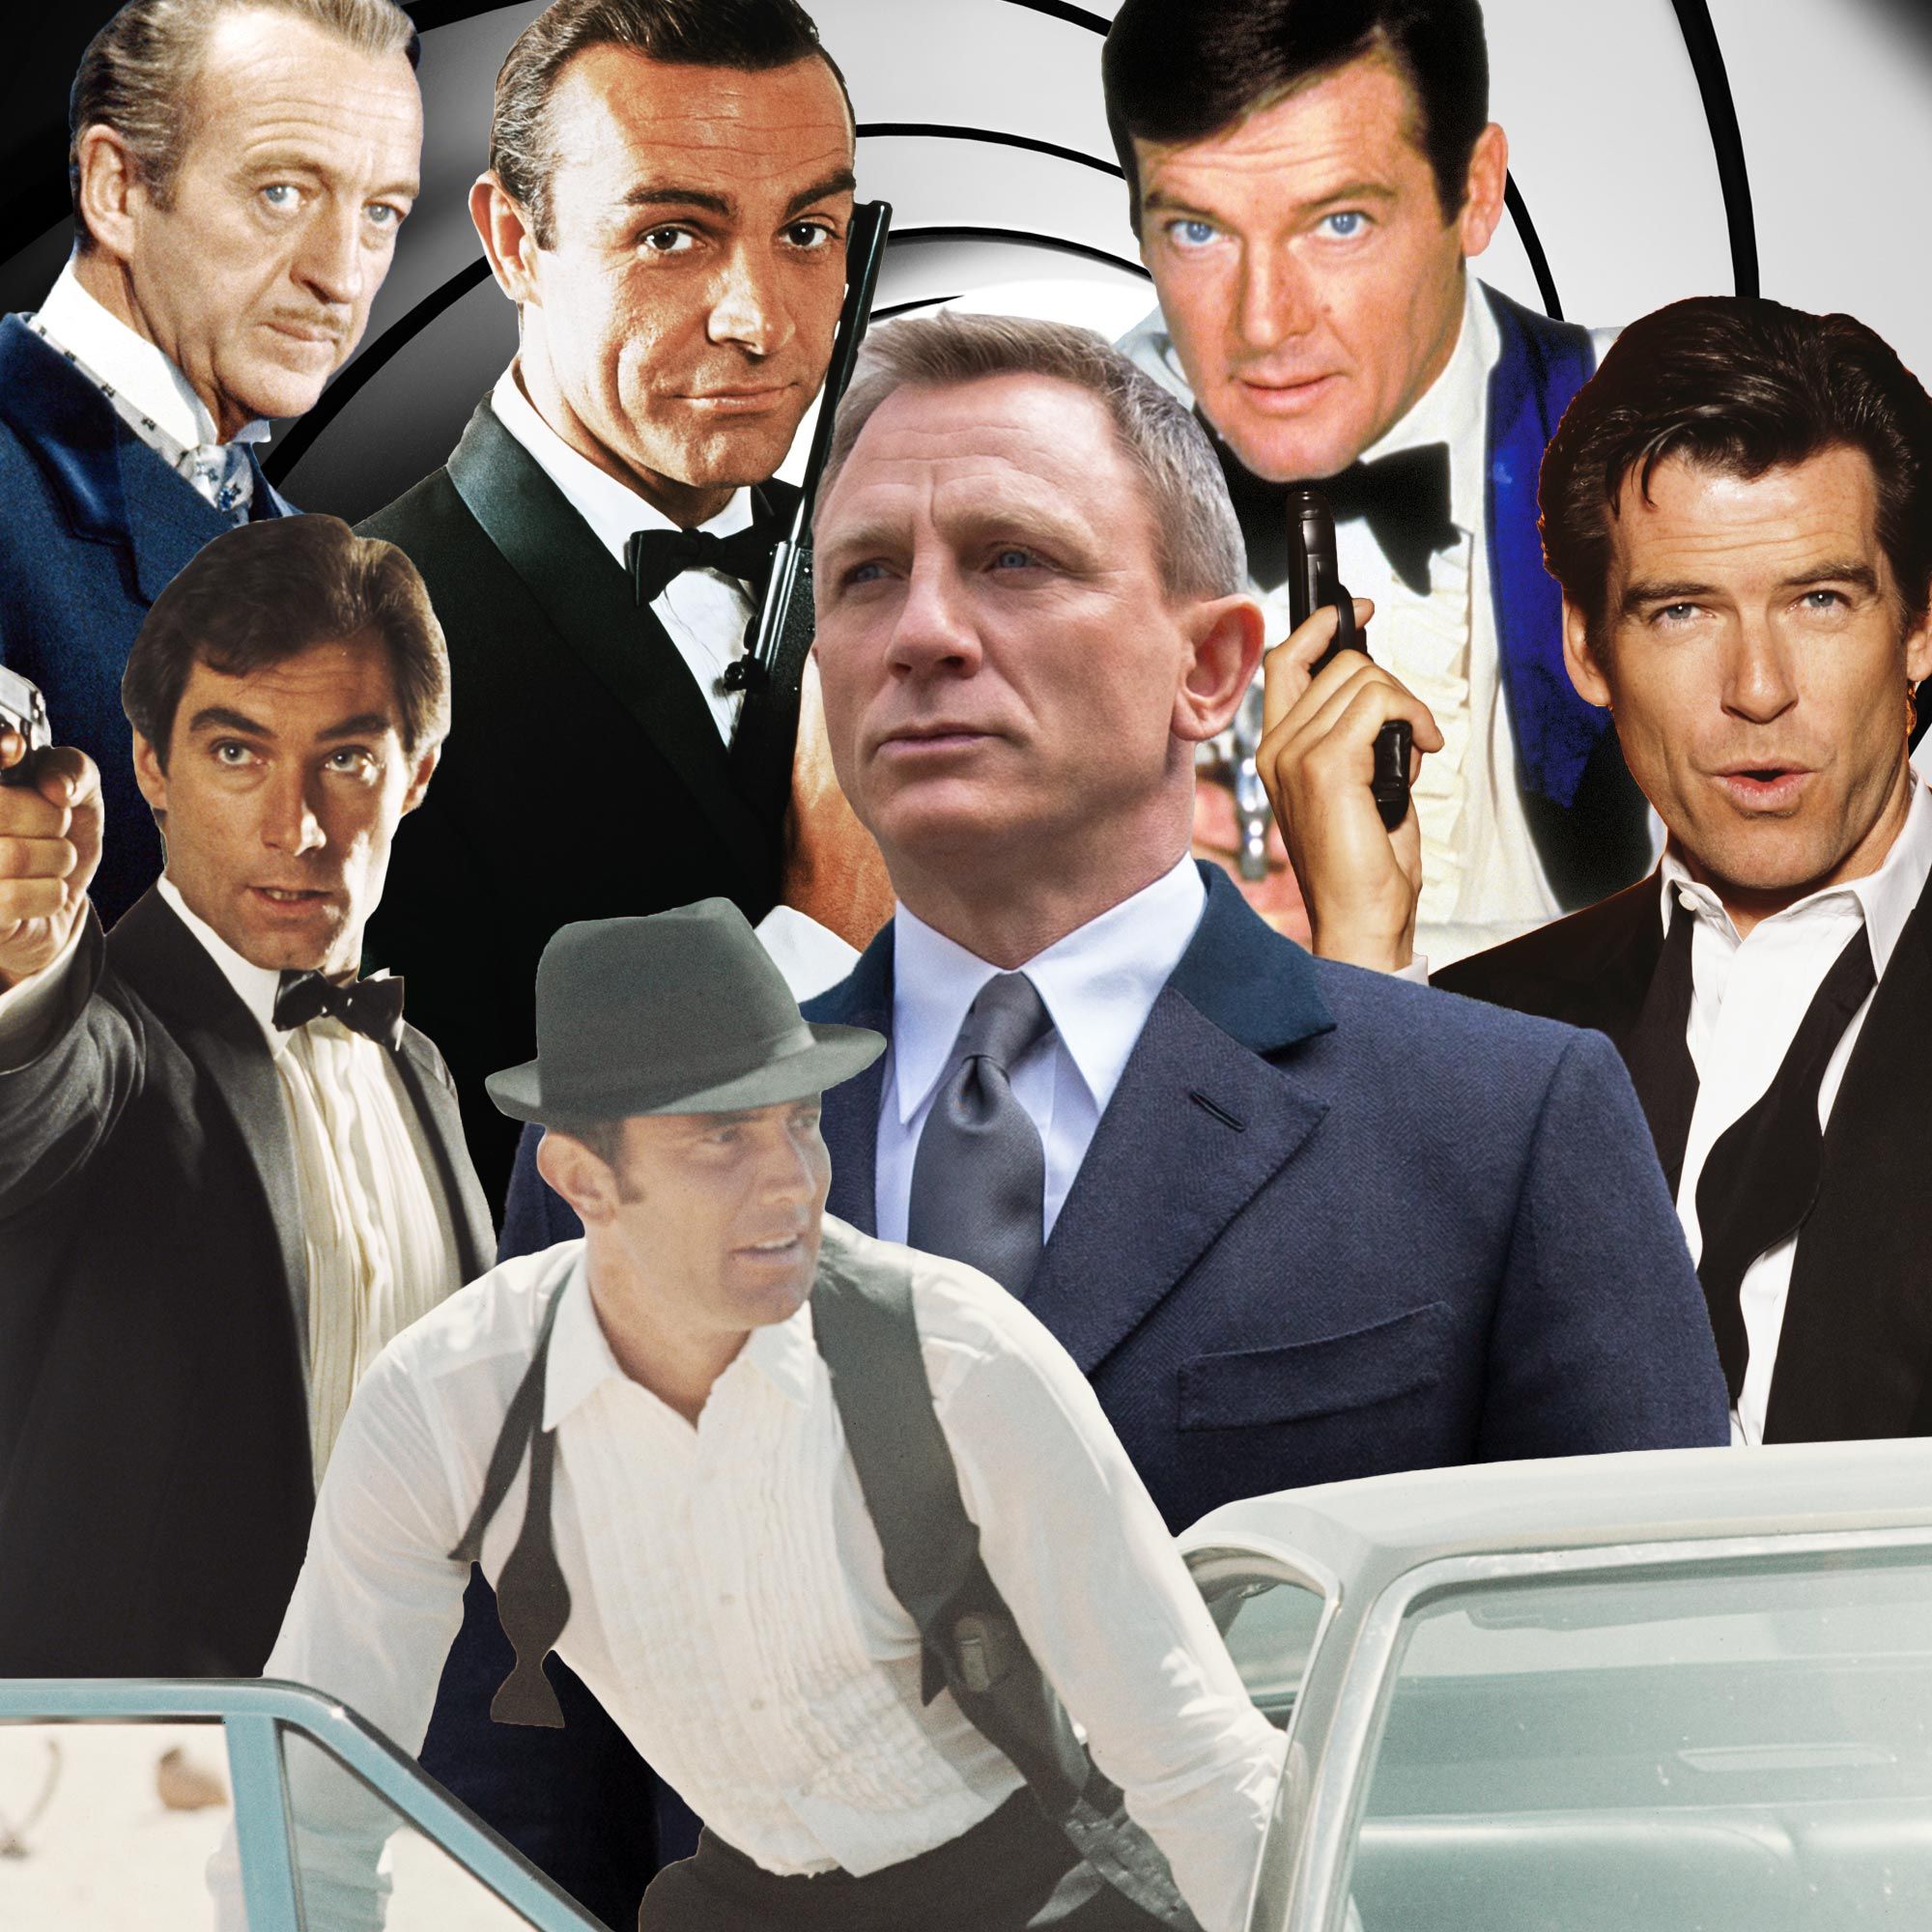 How to watch Bond movies online before No Time To Die